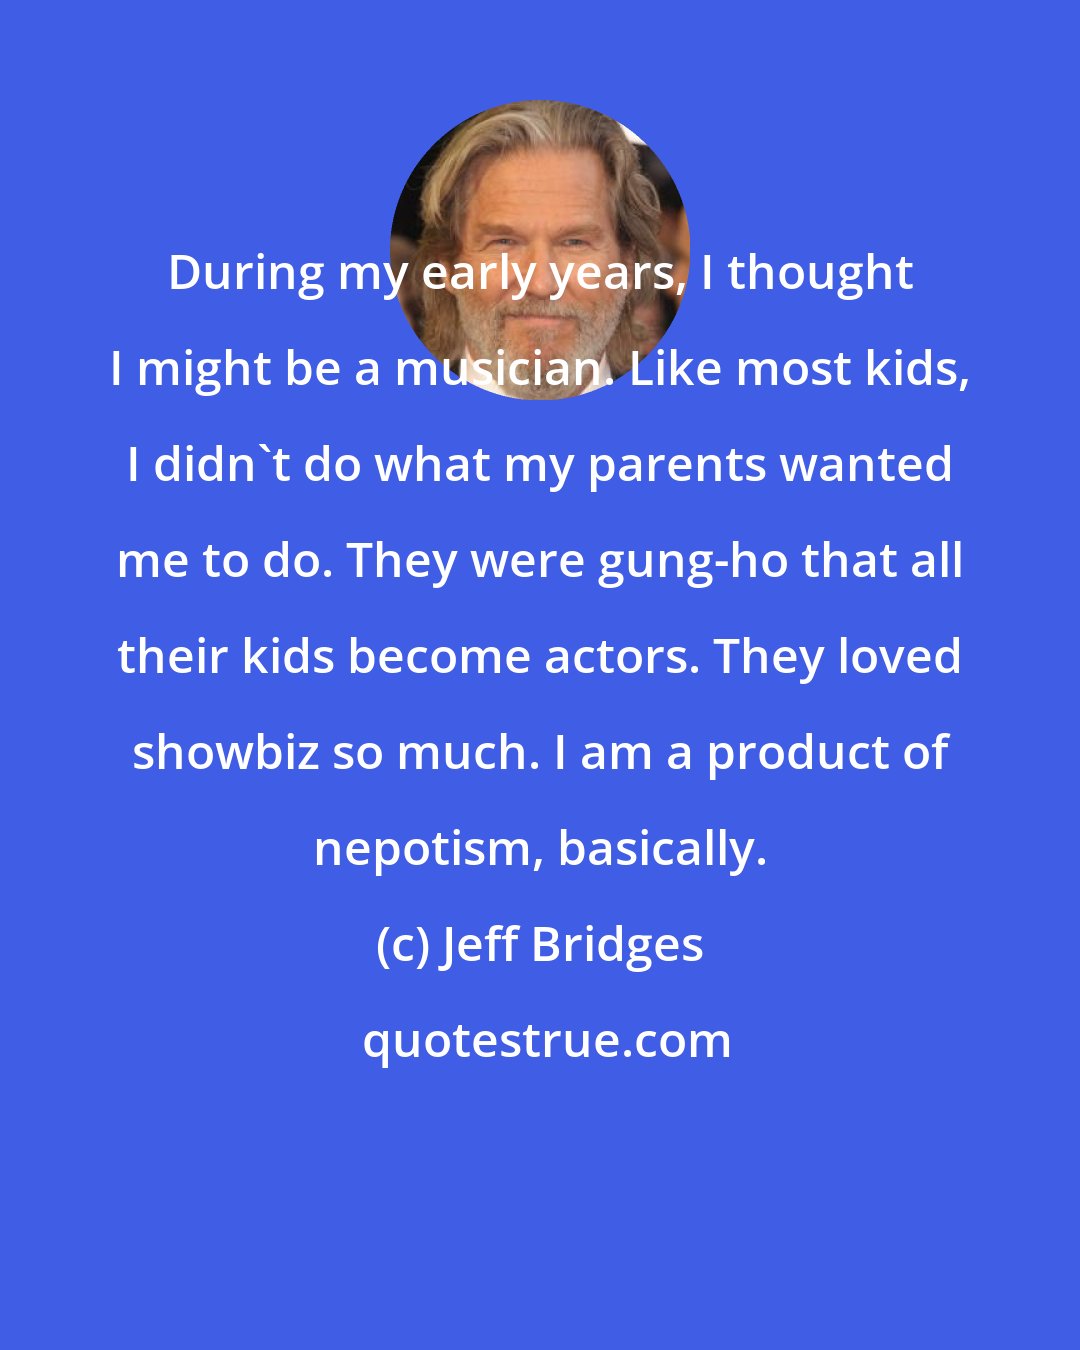 Jeff Bridges: During my early years, I thought I might be a musician. Like most kids, I didn't do what my parents wanted me to do. They were gung-ho that all their kids become actors. They loved showbiz so much. I am a product of nepotism, basically.